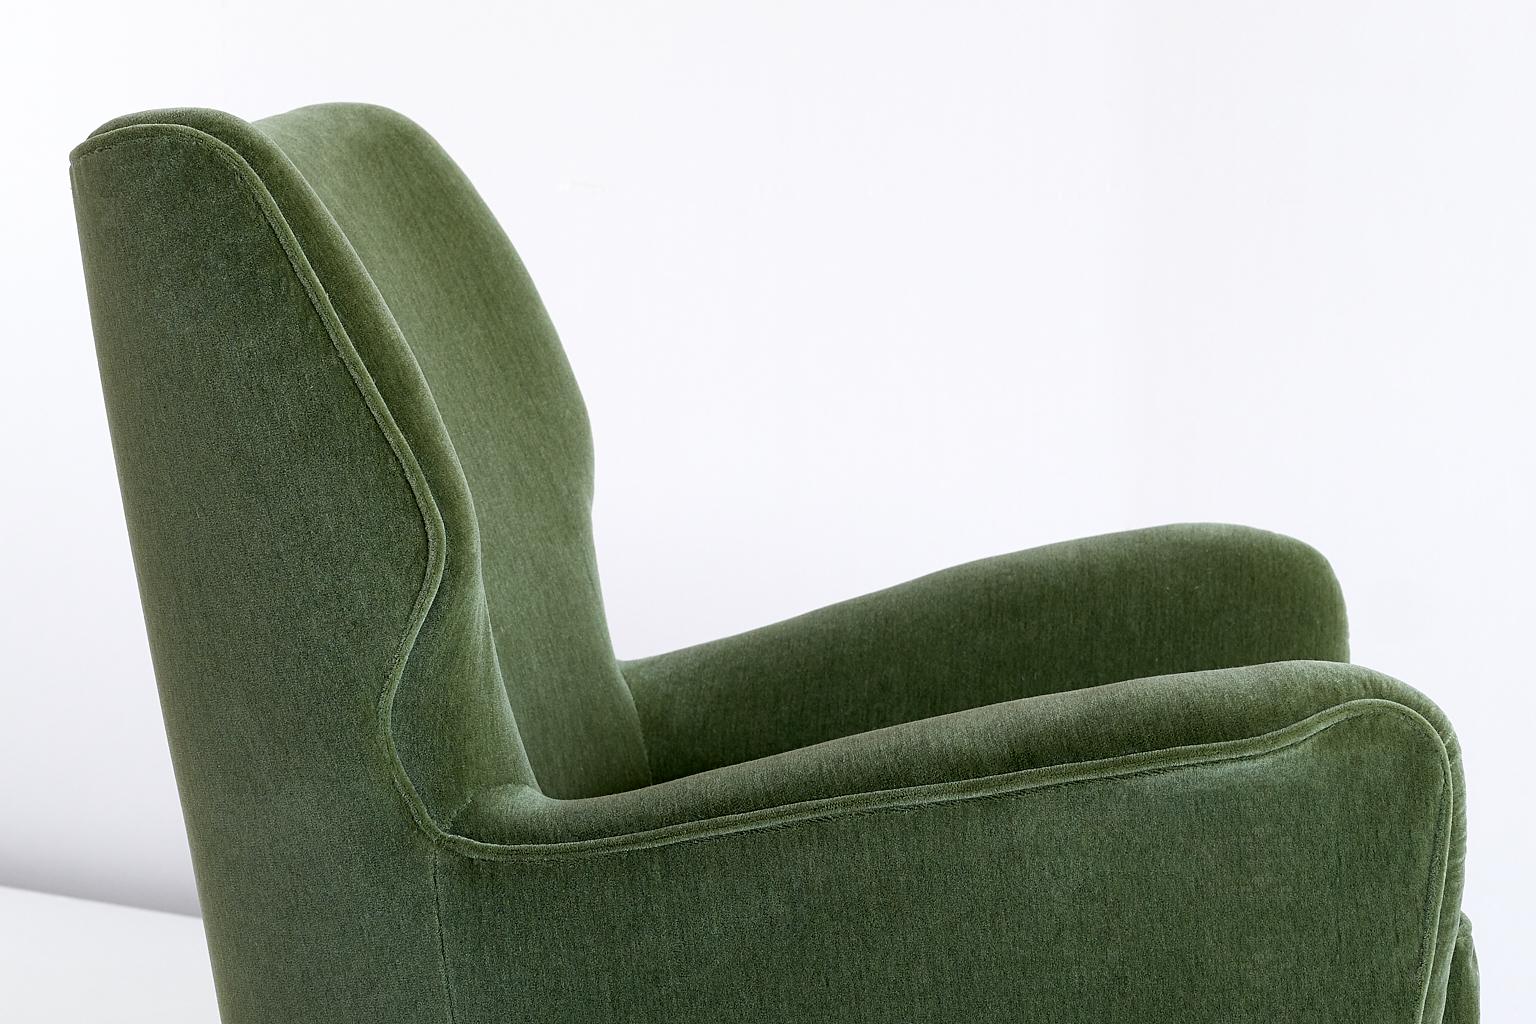 Mid-20th Century Gio Ponti Pair of Armchairs in Olive Green Velvet and Walnut, Italy, 1949